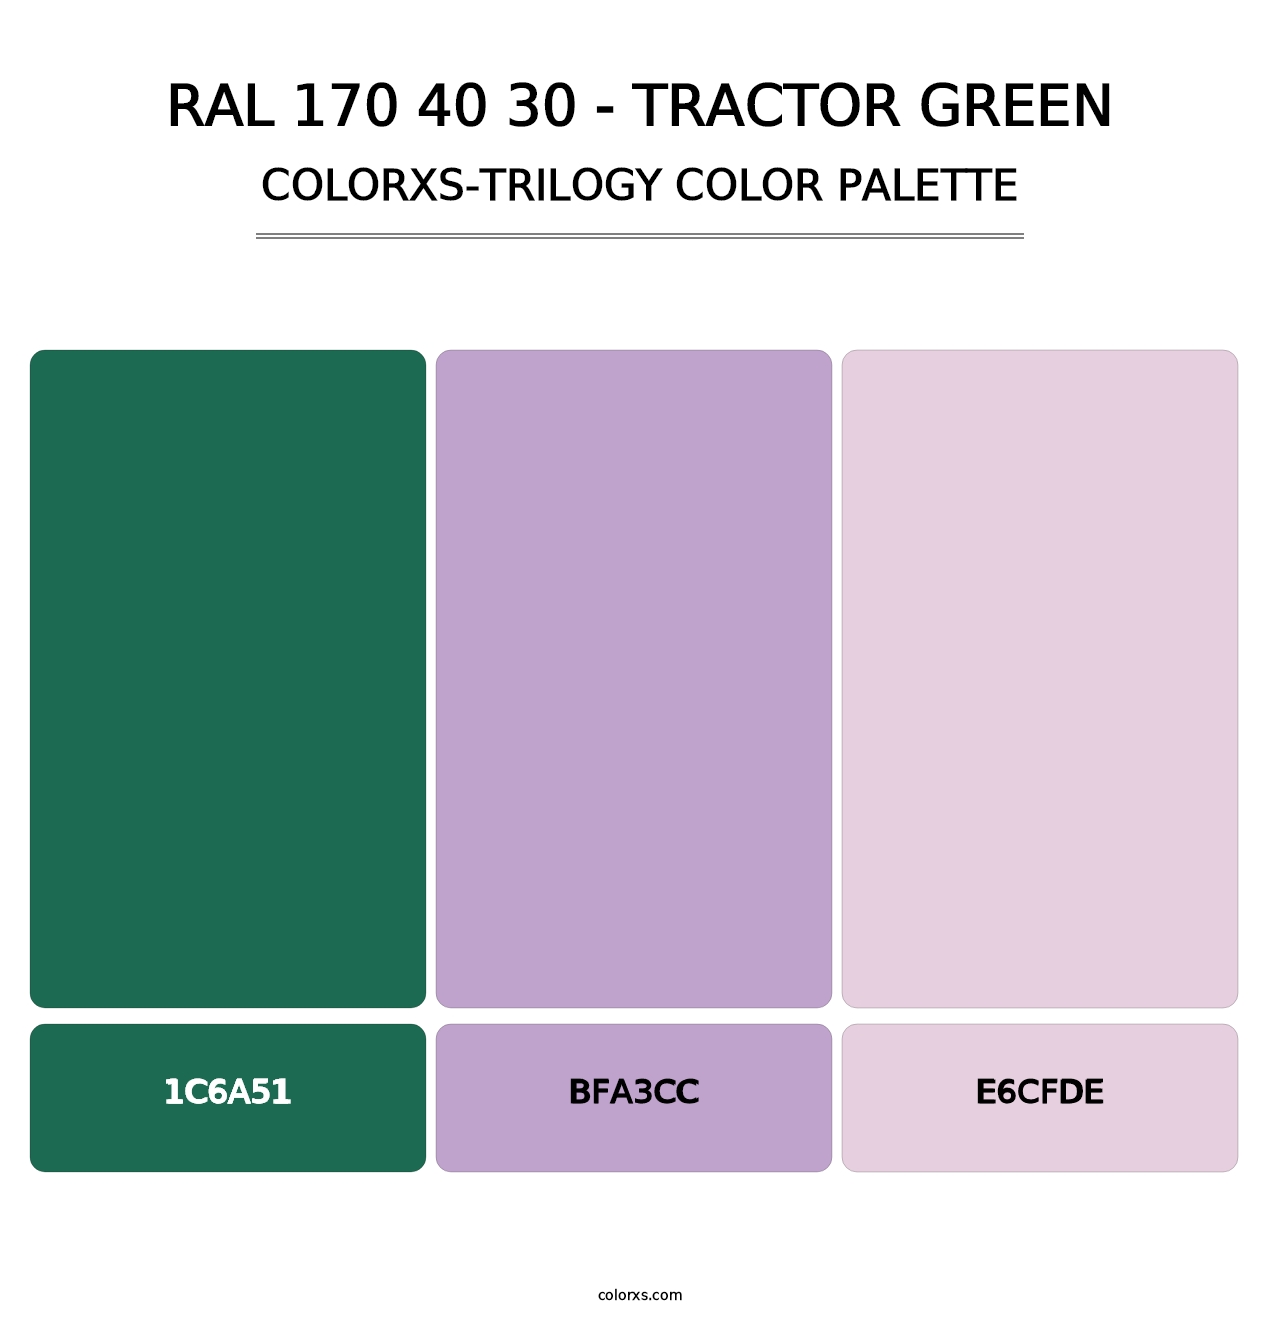 RAL 170 40 30 - Tractor Green - Colorxs Trilogy Palette